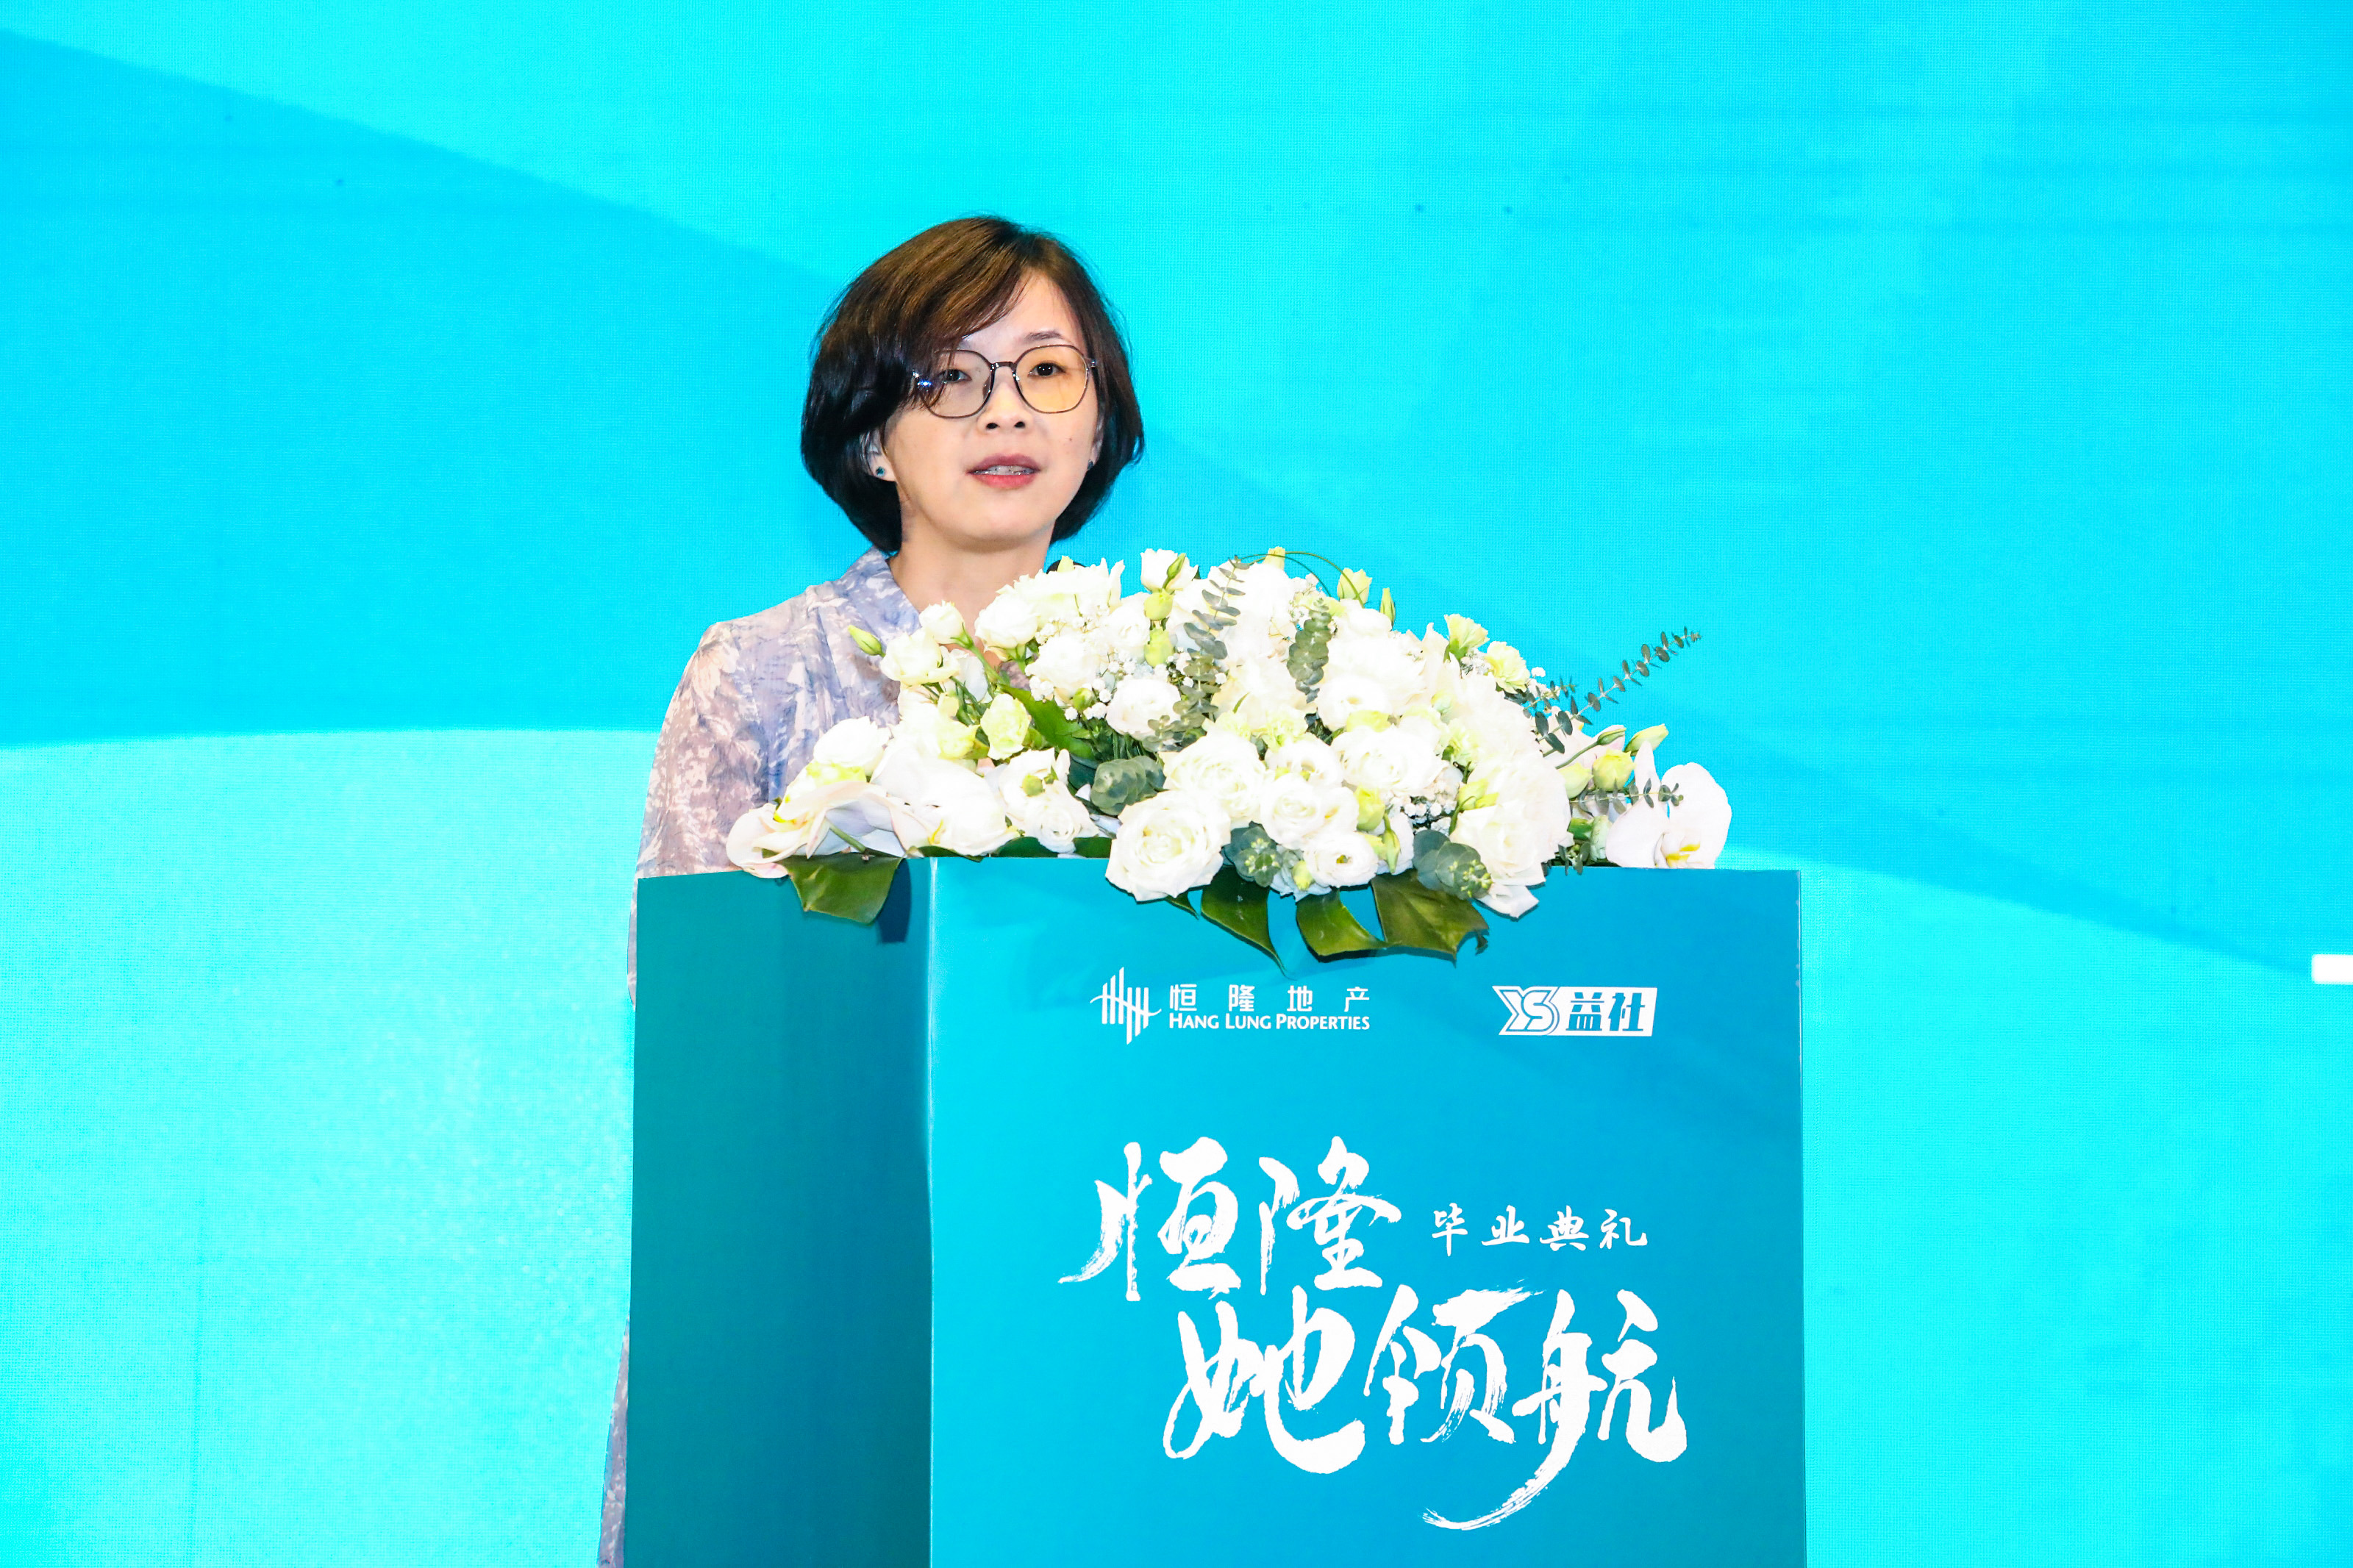 Ms. Lu Ying, President of the Jing’an District Women’s Federation, gives her speech at the graduation ceremony